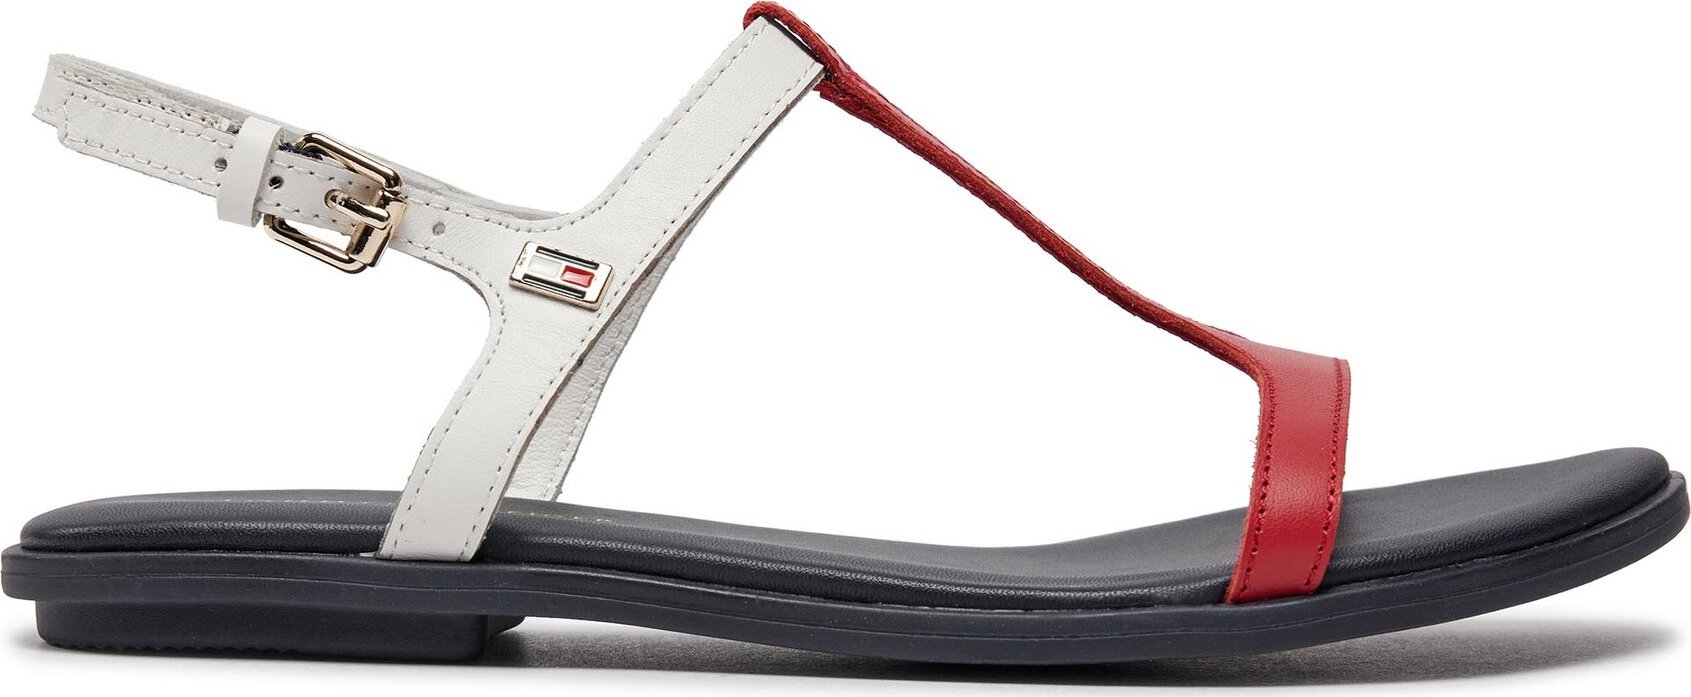 Sandály Tommy Hilfiger Th Flat Sandal FW0FW07930 Red White Blue 0G0